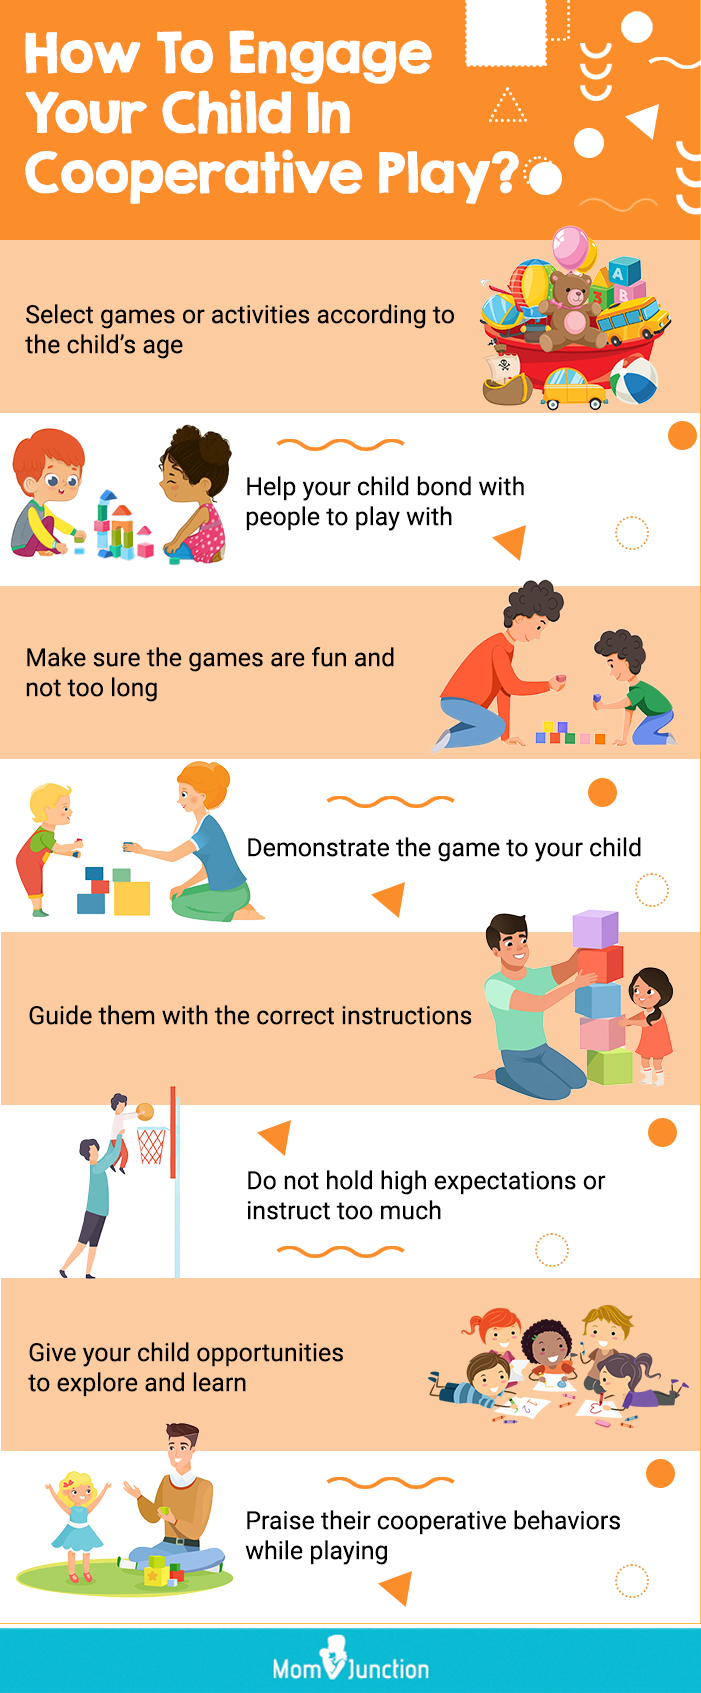 Playing With Purpose: Using Games to Enrich Learning & Engage